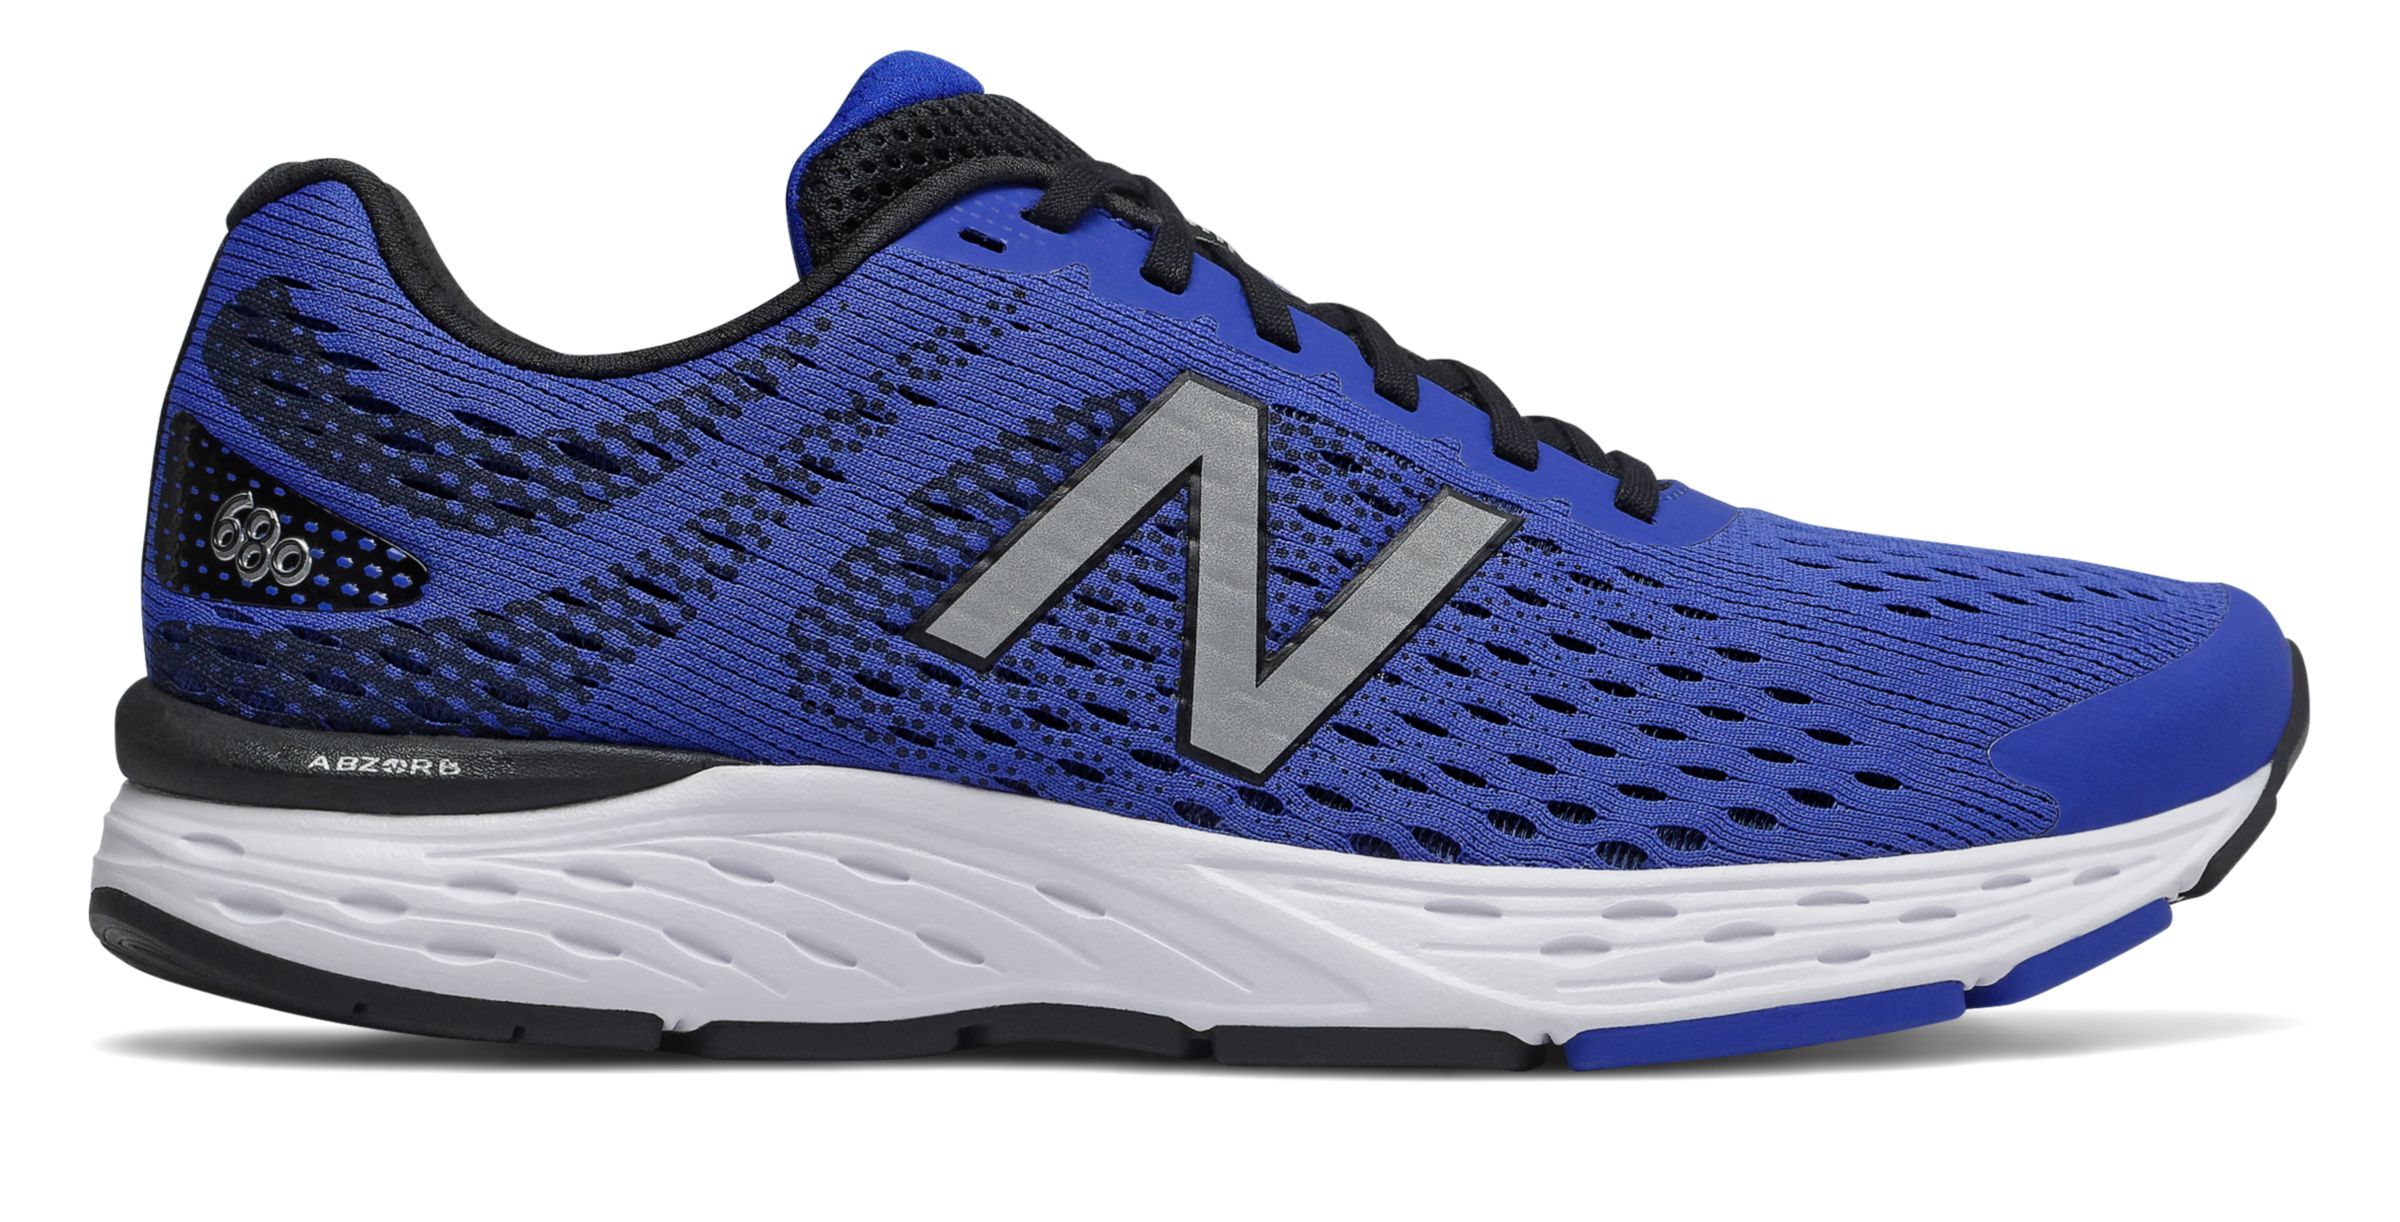 New Balance M680-V6 on Sale - Discounts Up to 54% Off on M680LB6 at Joe's  New Balance Outlet